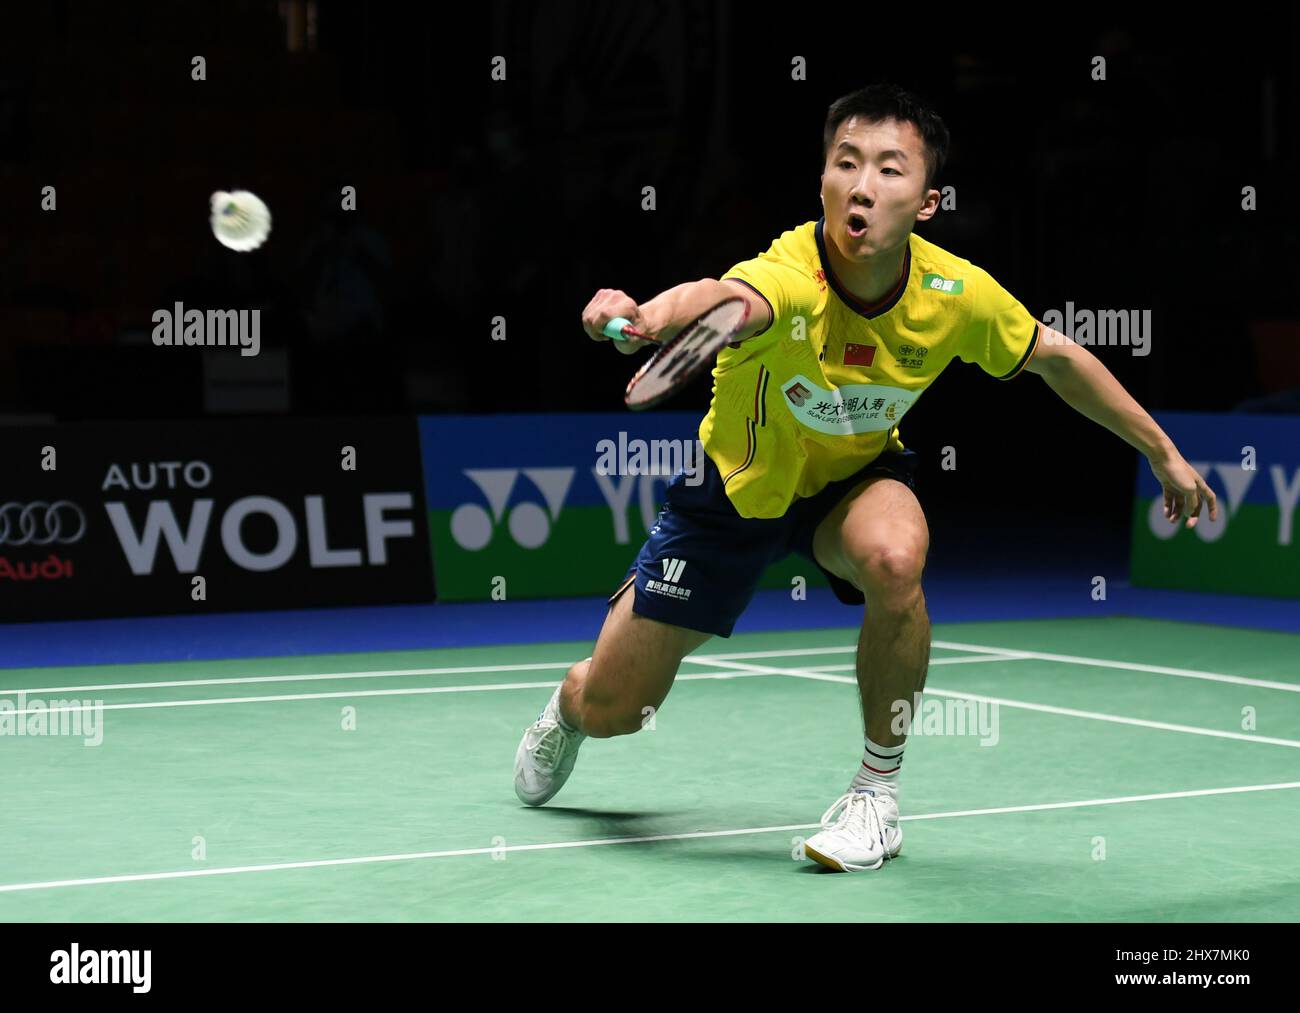 Lu Guangzu of China returns a shot to Loh Kean Yew of Singapore during the quarterfinal round of the mens single match in the Indonesia Masters badminton tournament at the Istora Stadium